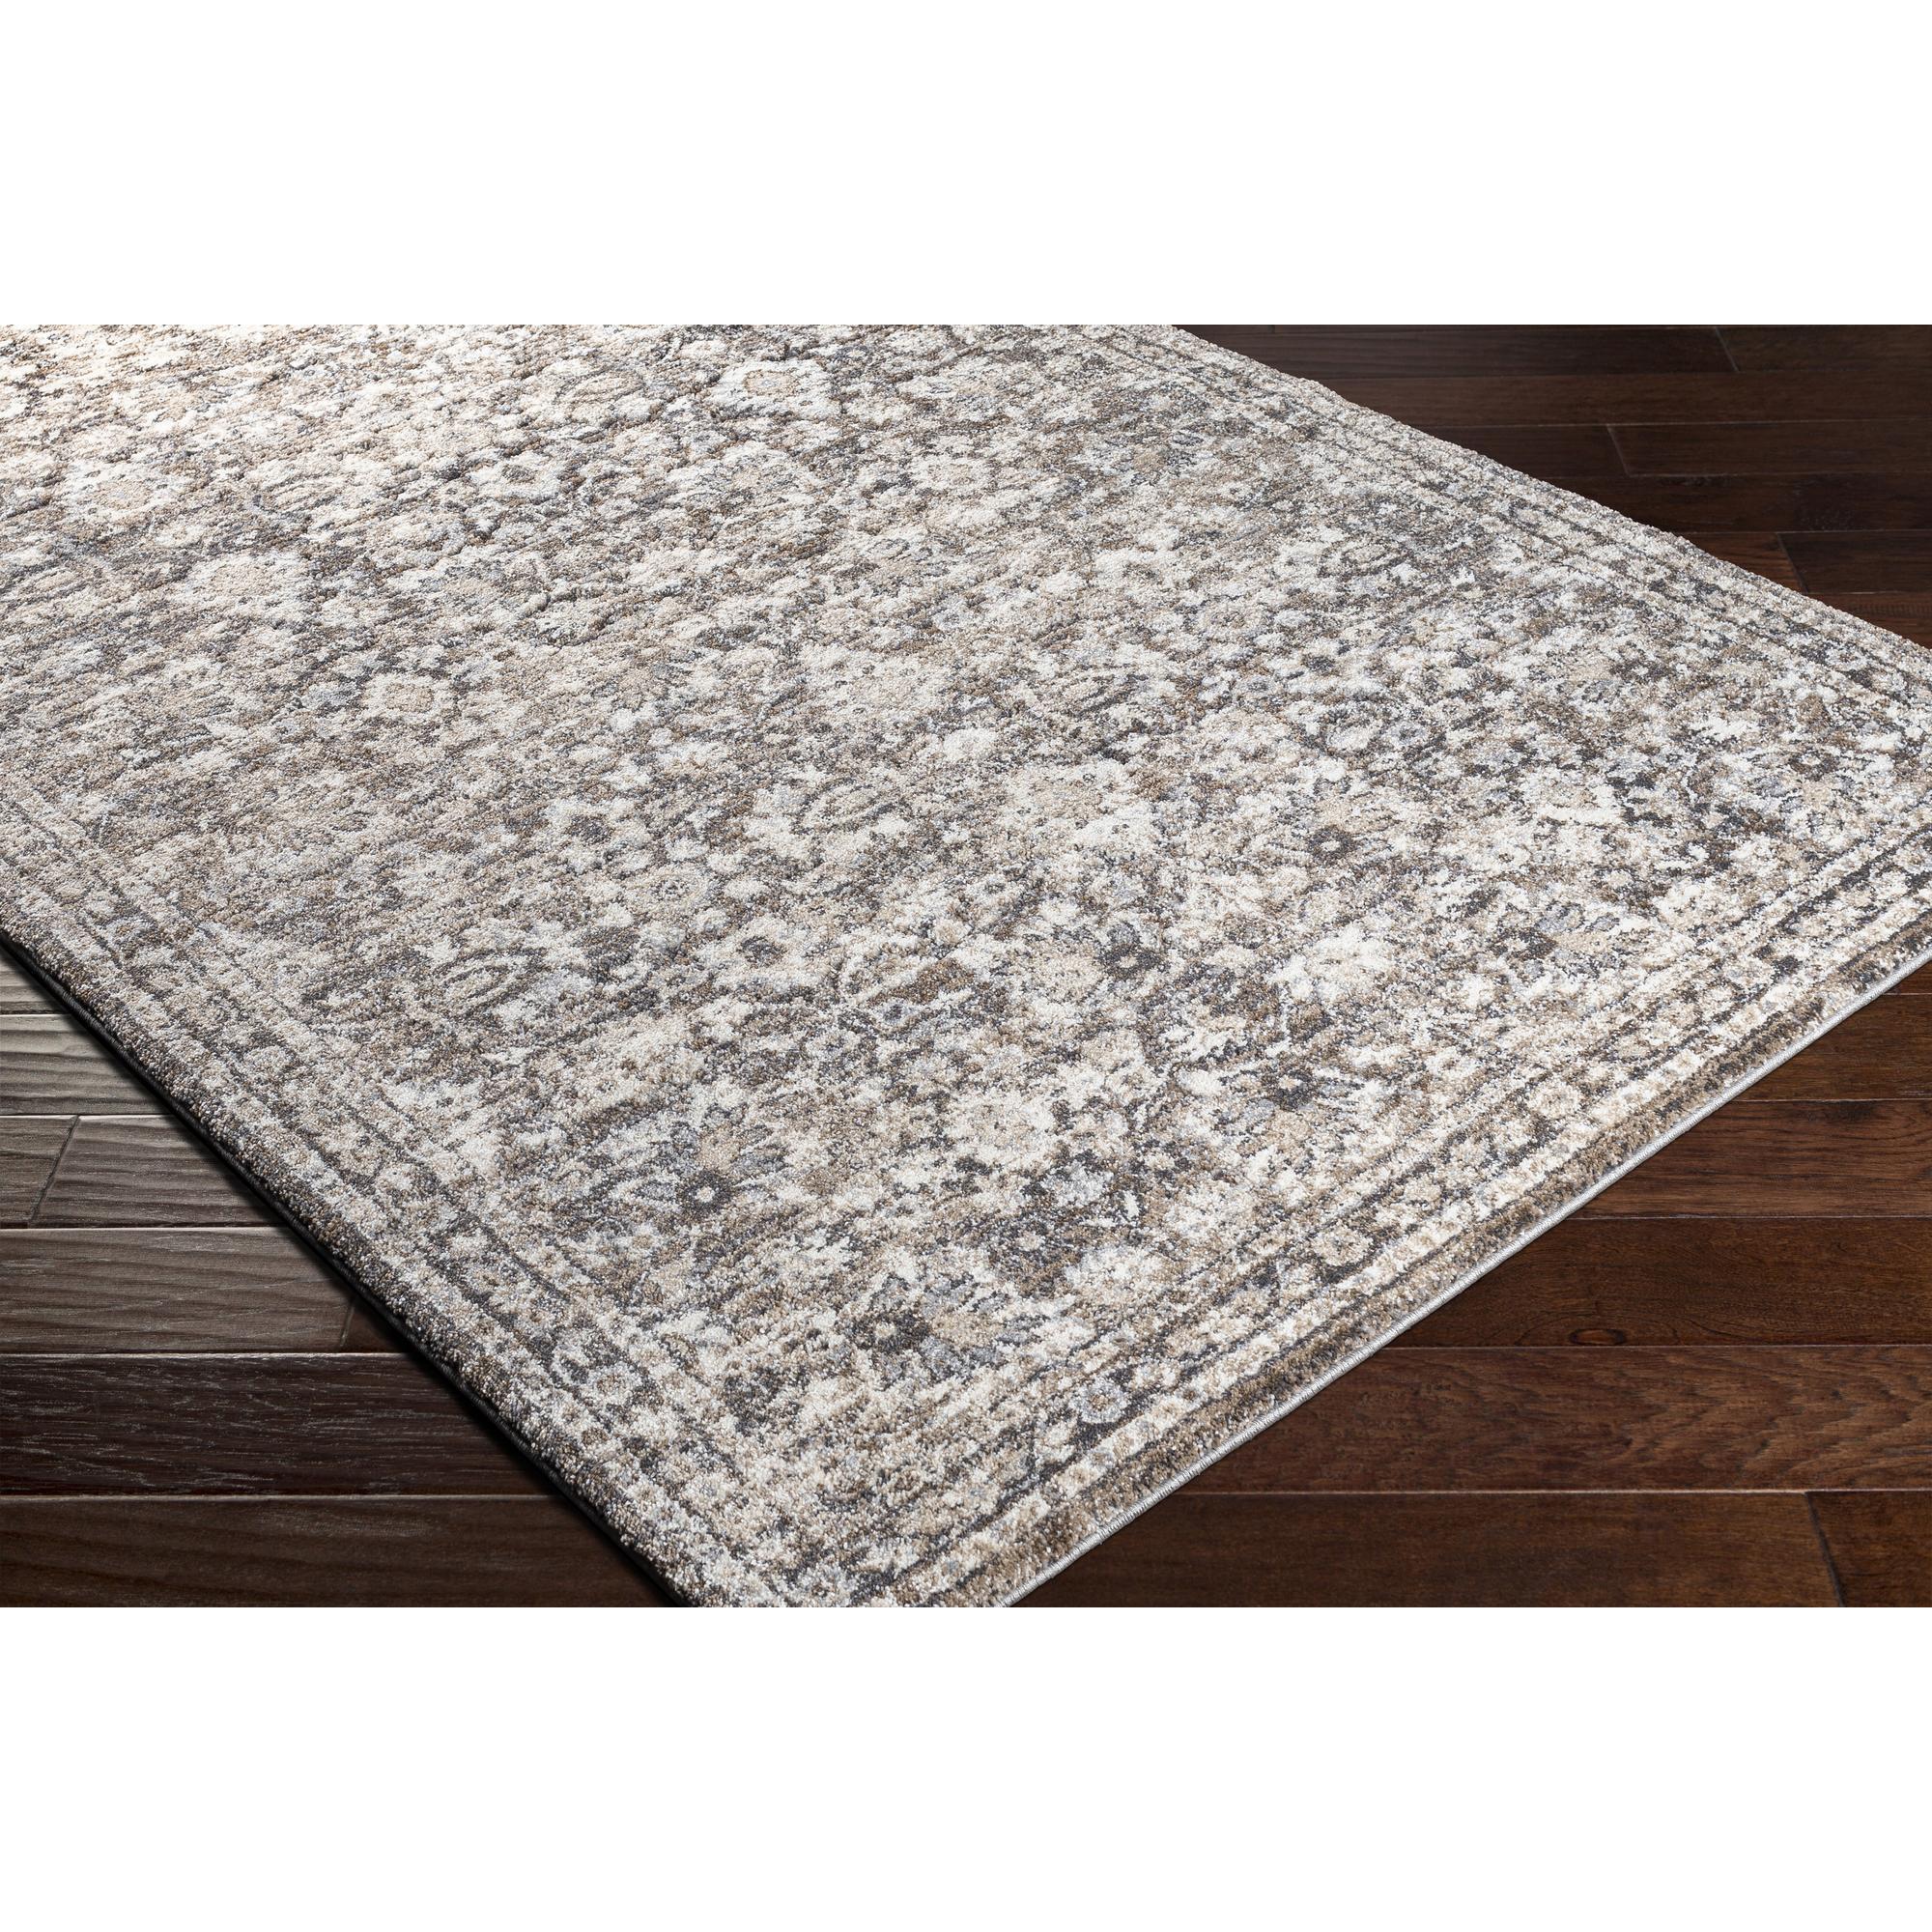 Surya 2 X 3 Taupe Indoor Medallion Vintage Area Rug in the Rugs ...